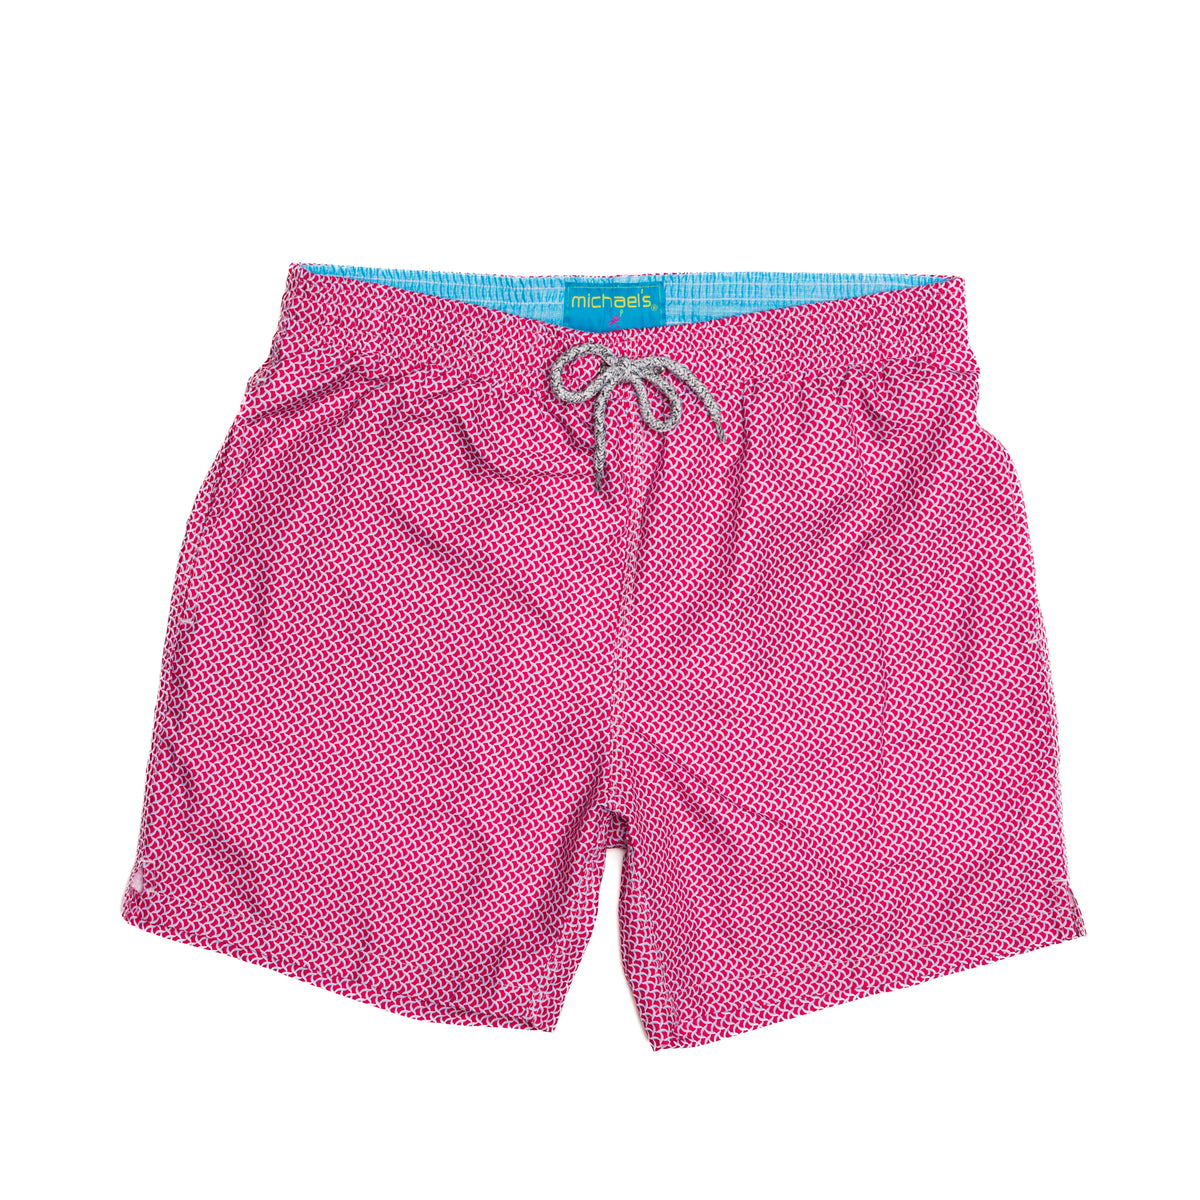 Coral/turquoise swim trunks with wave pattern for boys